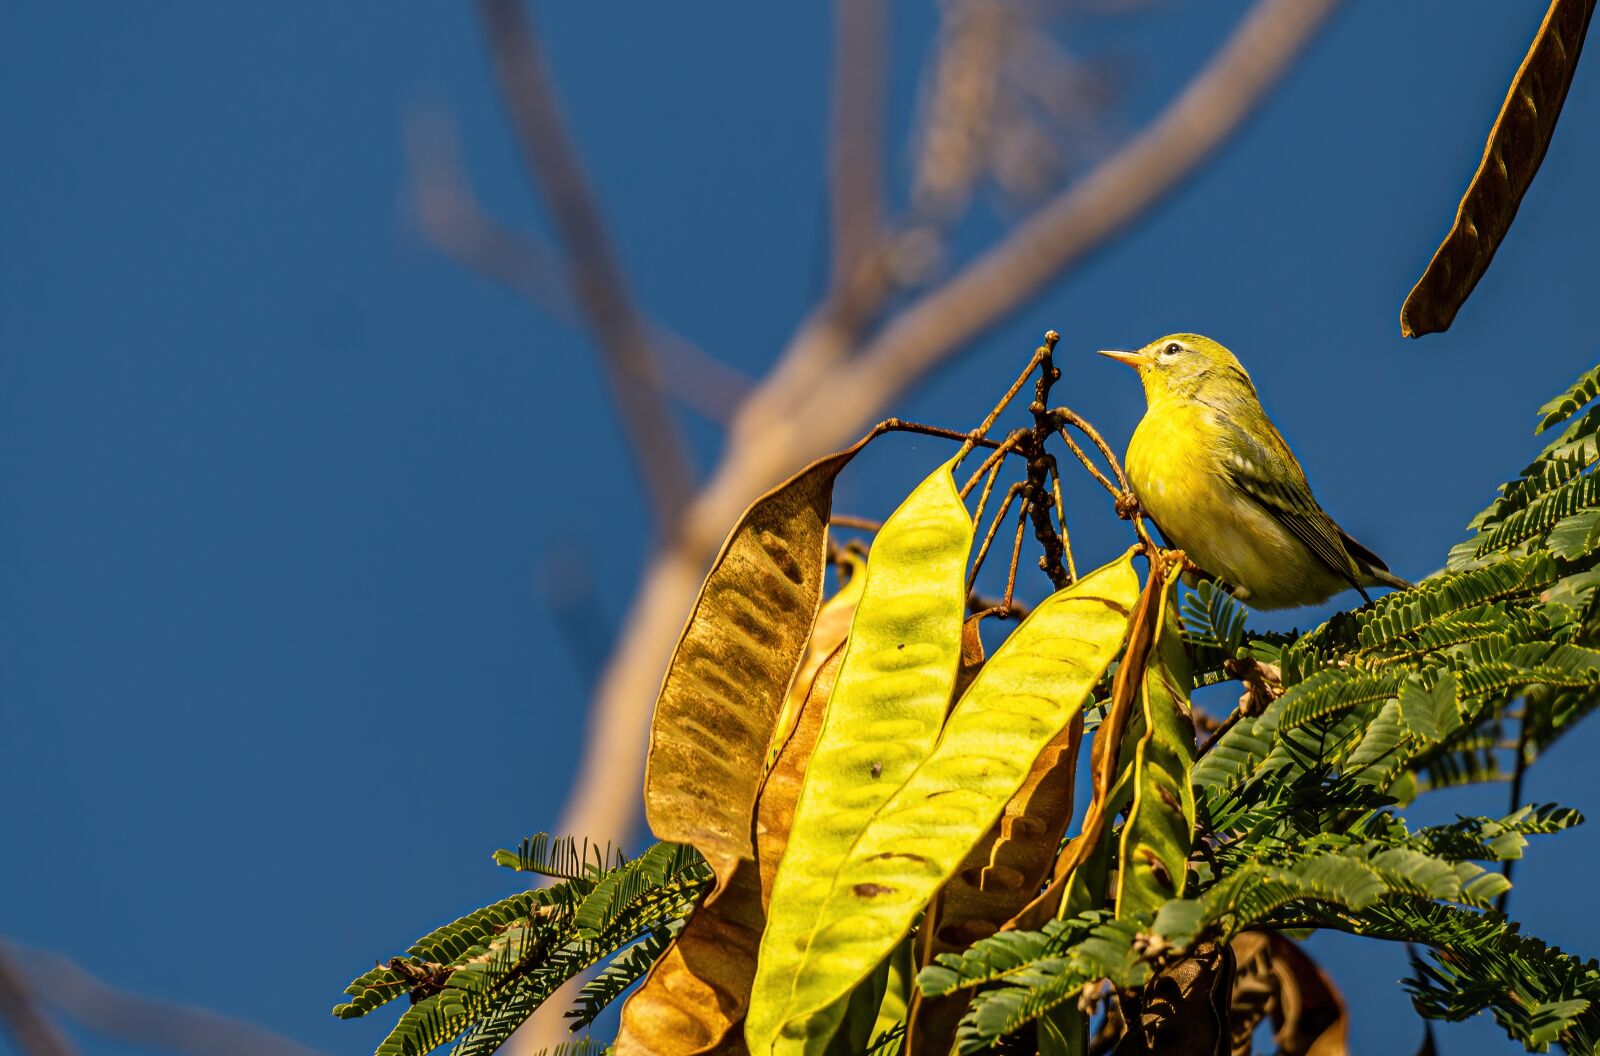 Sony a6400 sample photo. "Yellow warbler, warbler, pine" photography